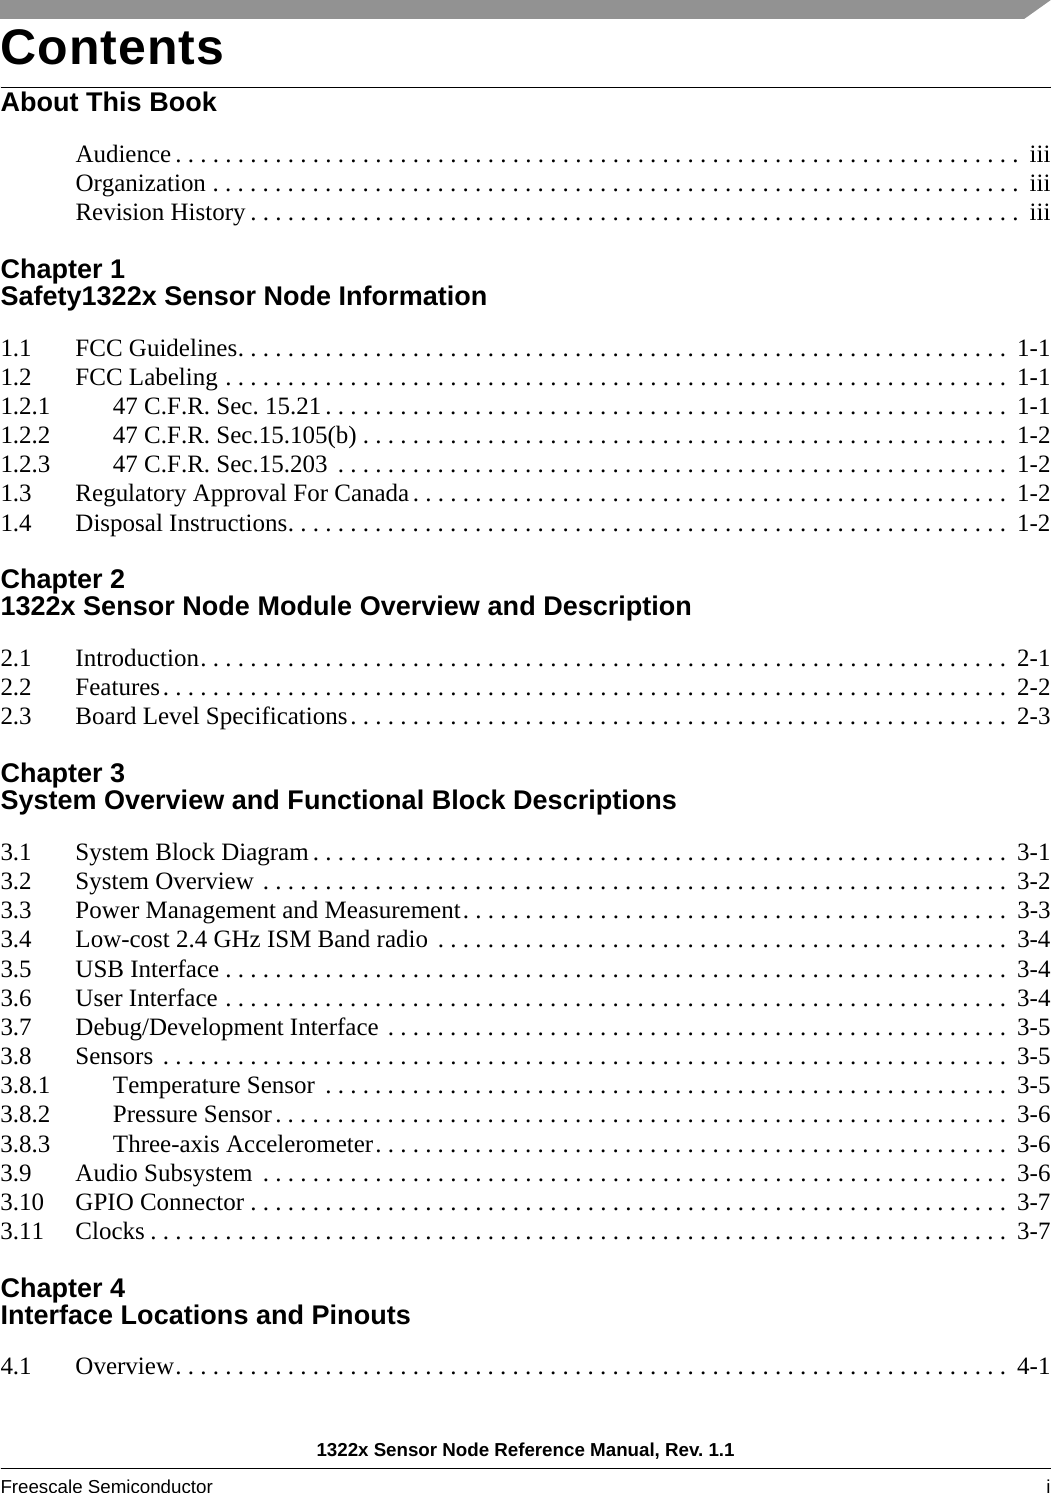 1322x Sensor Node Reference Manual, Rev. 1.1Freescale Semiconductor i ContentsAbout This BookAudience . . . . . . . . . . . . . . . . . . . . . . . . . . . . . . . . . . . . . . . . . . . . . . . . . . . . . . . . . . . . . . . . . . . .  iiiOrganization . . . . . . . . . . . . . . . . . . . . . . . . . . . . . . . . . . . . . . . . . . . . . . . . . . . . . . . . . . . . . . . . .  iiiRevision History . . . . . . . . . . . . . . . . . . . . . . . . . . . . . . . . . . . . . . . . . . . . . . . . . . . . . . . . . . . . . .  iiiChapter 1 Safety1322x Sensor Node Information1.1 FCC Guidelines. . . . . . . . . . . . . . . . . . . . . . . . . . . . . . . . . . . . . . . . . . . . . . . . . . . . . . . . . . . . . .  1-11.2 FCC Labeling . . . . . . . . . . . . . . . . . . . . . . . . . . . . . . . . . . . . . . . . . . . . . . . . . . . . . . . . . . . . . . .  1-11.2.1 47 C.F.R. Sec. 15.21 . . . . . . . . . . . . . . . . . . . . . . . . . . . . . . . . . . . . . . . . . . . . . . . . . . . . . . .  1-11.2.2 47 C.F.R. Sec.15.105(b) . . . . . . . . . . . . . . . . . . . . . . . . . . . . . . . . . . . . . . . . . . . . . . . . . . . .  1-21.2.3 47 C.F.R. Sec.15.203  . . . . . . . . . . . . . . . . . . . . . . . . . . . . . . . . . . . . . . . . . . . . . . . . . . . . . .  1-21.3 Regulatory Approval For Canada. . . . . . . . . . . . . . . . . . . . . . . . . . . . . . . . . . . . . . . . . . . . . . . . 1-21.4 Disposal Instructions. . . . . . . . . . . . . . . . . . . . . . . . . . . . . . . . . . . . . . . . . . . . . . . . . . . . . . . . . .  1-2Chapter 2 1322x Sensor Node Module Overview and Description2.1 Introduction. . . . . . . . . . . . . . . . . . . . . . . . . . . . . . . . . . . . . . . . . . . . . . . . . . . . . . . . . . . . . . . . .  2-12.2 Features. . . . . . . . . . . . . . . . . . . . . . . . . . . . . . . . . . . . . . . . . . . . . . . . . . . . . . . . . . . . . . . . . . . .  2-22.3 Board Level Specifications. . . . . . . . . . . . . . . . . . . . . . . . . . . . . . . . . . . . . . . . . . . . . . . . . . . . .  2-3Chapter 3 System Overview and Functional Block Descriptions3.1 System Block Diagram . . . . . . . . . . . . . . . . . . . . . . . . . . . . . . . . . . . . . . . . . . . . . . . . . . . . . . . .  3-13.2 System Overview . . . . . . . . . . . . . . . . . . . . . . . . . . . . . . . . . . . . . . . . . . . . . . . . . . . . . . . . . . . .  3-23.3 Power Management and Measurement. . . . . . . . . . . . . . . . . . . . . . . . . . . . . . . . . . . . . . . . . . . .  3-33.4 Low-cost 2.4 GHz ISM Band radio . . . . . . . . . . . . . . . . . . . . . . . . . . . . . . . . . . . . . . . . . . . . . .  3-43.5 USB Interface . . . . . . . . . . . . . . . . . . . . . . . . . . . . . . . . . . . . . . . . . . . . . . . . . . . . . . . . . . . . . . .  3-43.6 User Interface . . . . . . . . . . . . . . . . . . . . . . . . . . . . . . . . . . . . . . . . . . . . . . . . . . . . . . . . . . . . . . .  3-43.7 Debug/Development Interface . . . . . . . . . . . . . . . . . . . . . . . . . . . . . . . . . . . . . . . . . . . . . . . . . .  3-53.8 Sensors . . . . . . . . . . . . . . . . . . . . . . . . . . . . . . . . . . . . . . . . . . . . . . . . . . . . . . . . . . . . . . . . . . . .  3-53.8.1 Temperature Sensor  . . . . . . . . . . . . . . . . . . . . . . . . . . . . . . . . . . . . . . . . . . . . . . . . . . . . . . .  3-53.8.2 Pressure Sensor. . . . . . . . . . . . . . . . . . . . . . . . . . . . . . . . . . . . . . . . . . . . . . . . . . . . . . . . . . .  3-63.8.3 Three-axis Accelerometer. . . . . . . . . . . . . . . . . . . . . . . . . . . . . . . . . . . . . . . . . . . . . . . . . . .  3-63.9 Audio Subsystem  . . . . . . . . . . . . . . . . . . . . . . . . . . . . . . . . . . . . . . . . . . . . . . . . . . . . . . . . . . . .  3-63.10 GPIO Connector . . . . . . . . . . . . . . . . . . . . . . . . . . . . . . . . . . . . . . . . . . . . . . . . . . . . . . . . . . . . .  3-73.11 Clocks . . . . . . . . . . . . . . . . . . . . . . . . . . . . . . . . . . . . . . . . . . . . . . . . . . . . . . . . . . . . . . . . . . . . .  3-7Chapter 4 Interface Locations and Pinouts4.1 Overview. . . . . . . . . . . . . . . . . . . . . . . . . . . . . . . . . . . . . . . . . . . . . . . . . . . . . . . . . . . . . . . . . . .  4-1